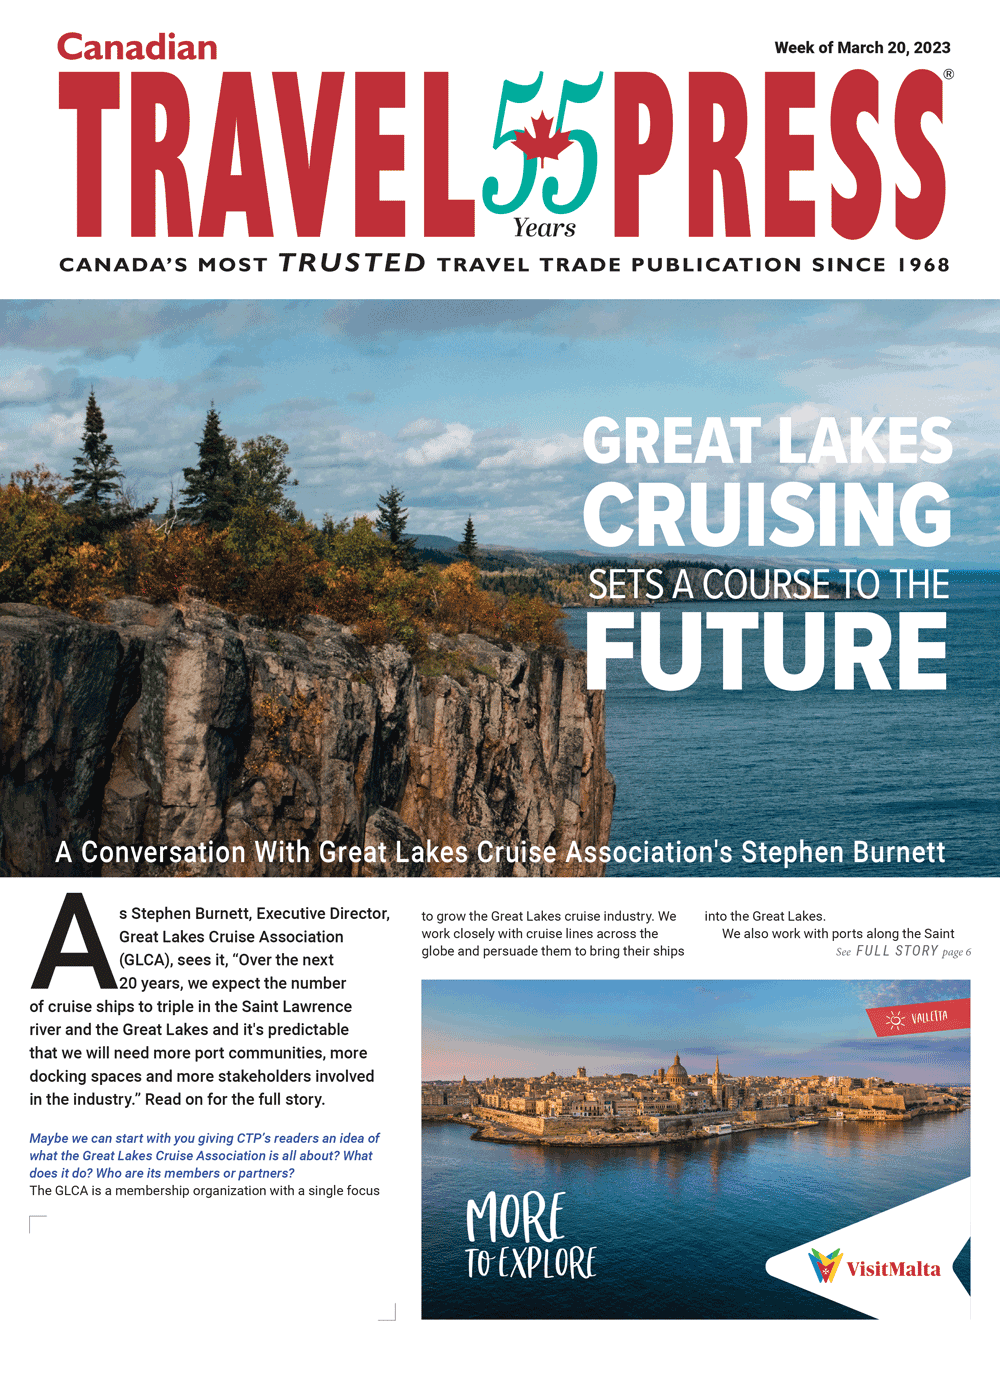 Cruising the Great Lakes – It’s Great!